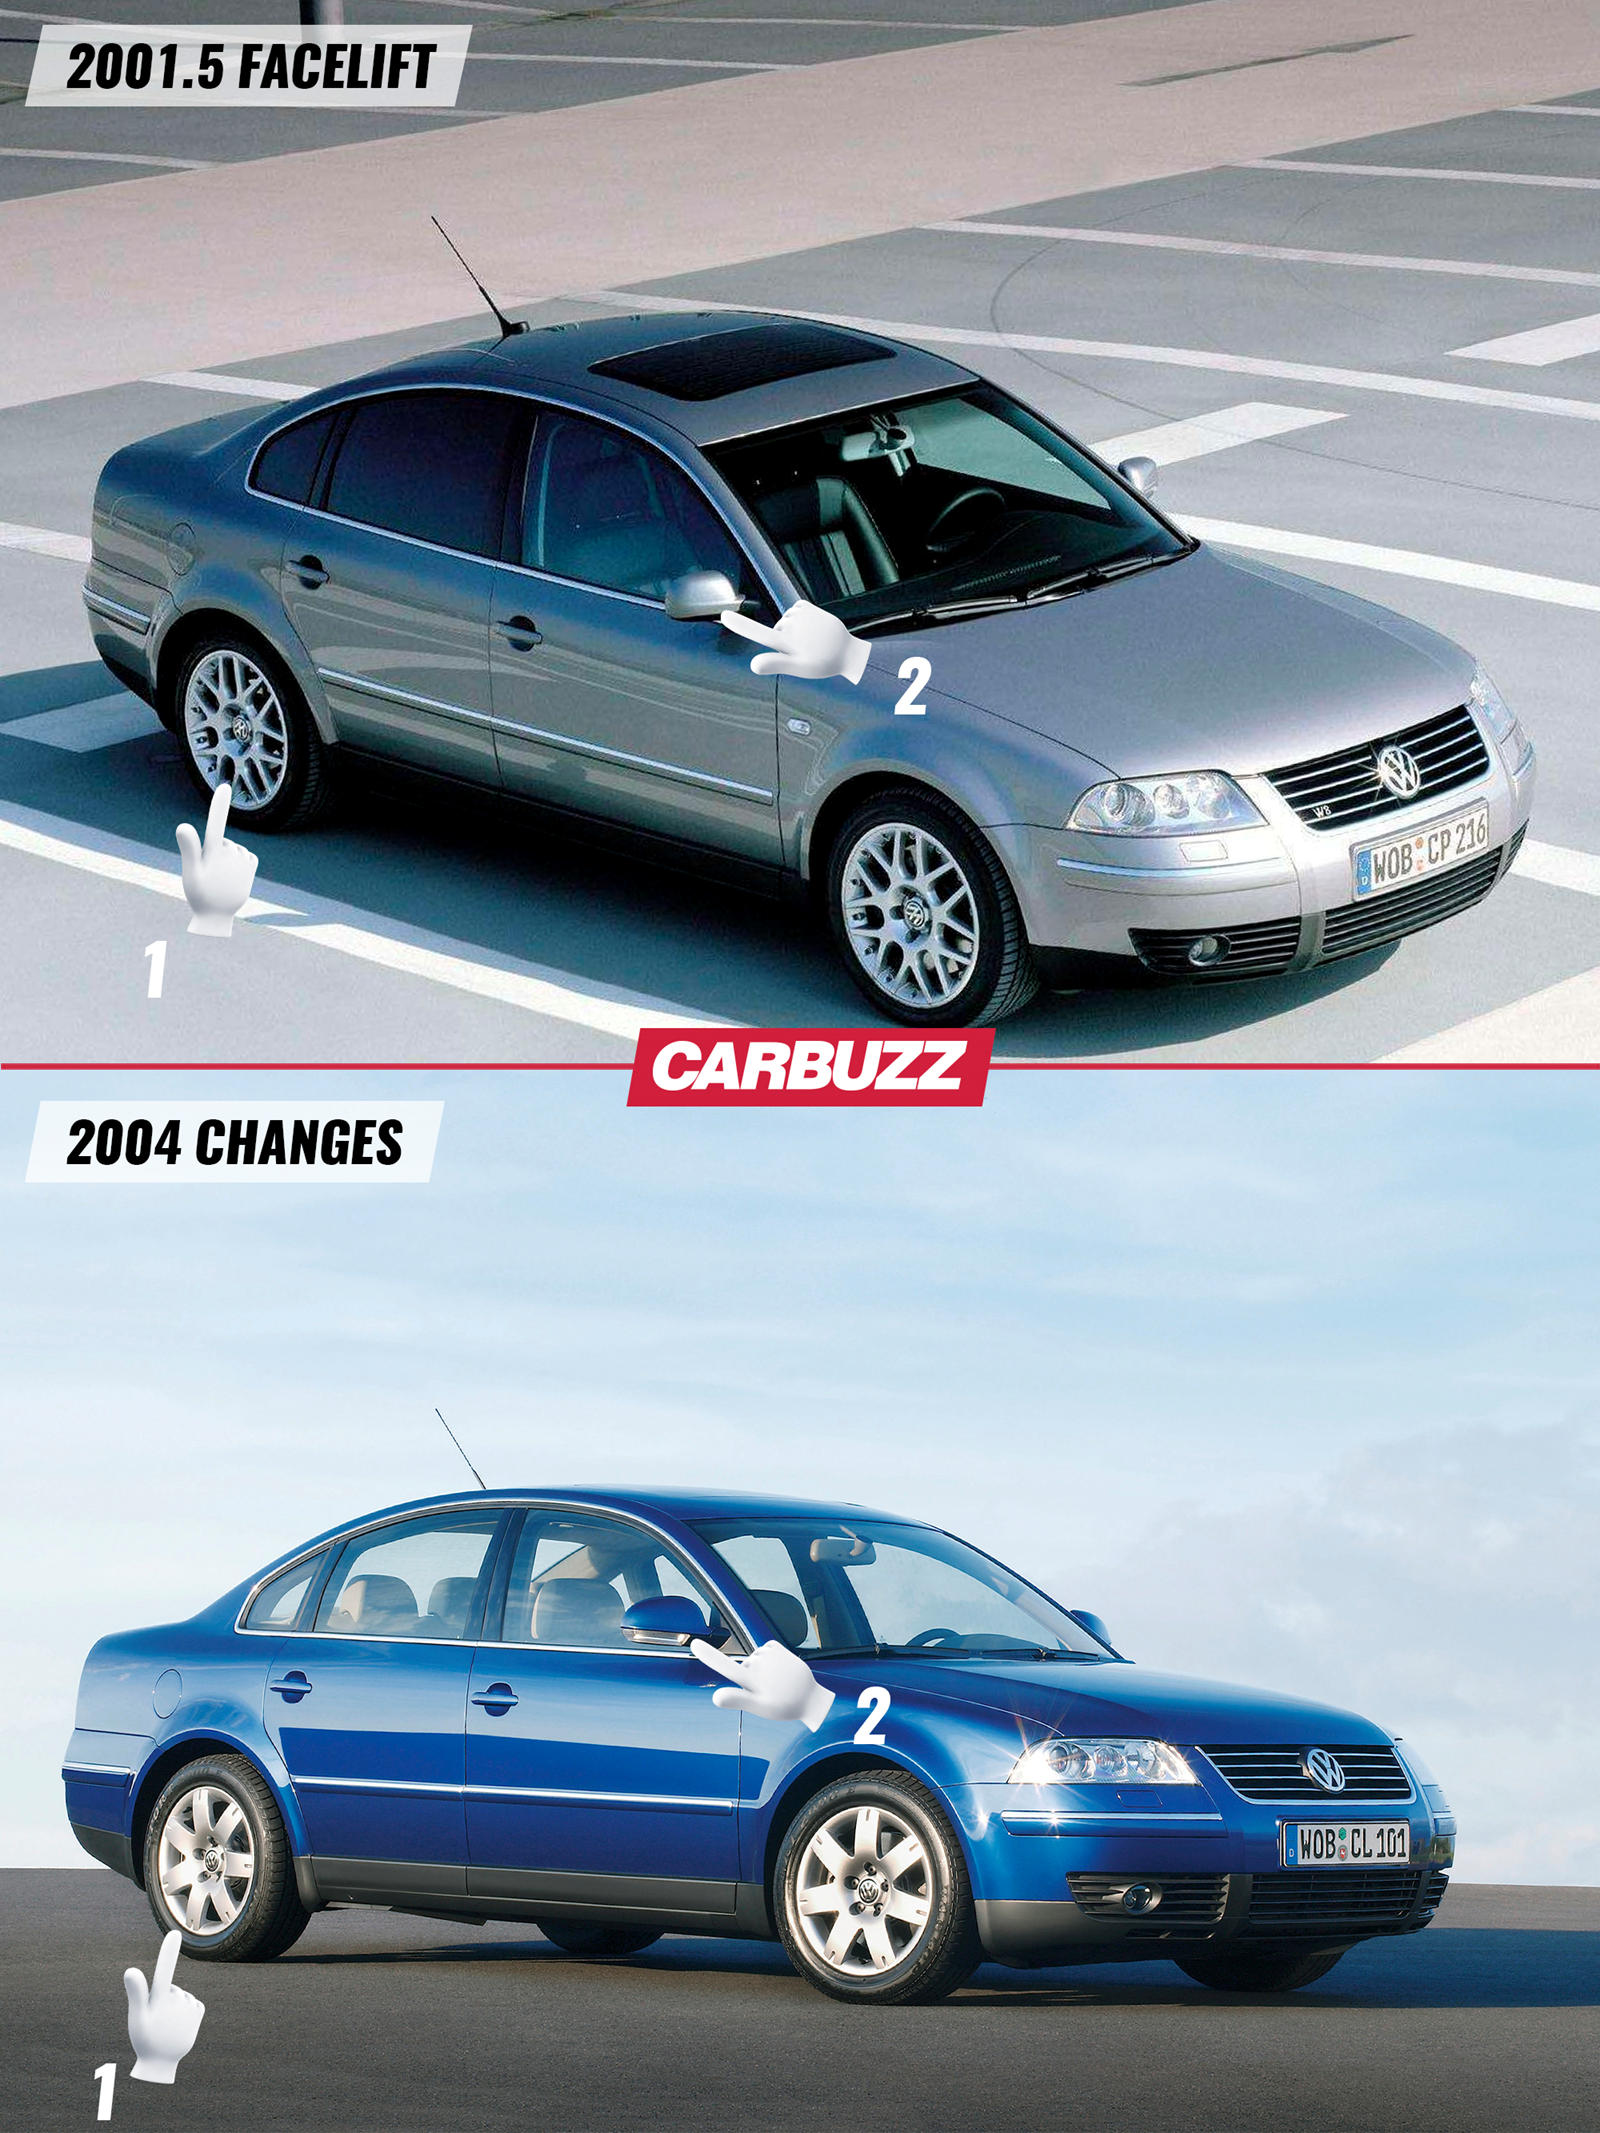 Buying advice Volkswagen Passat (B5/B5.5) 1996-2005, Common Issues,  Engines, Inspection 